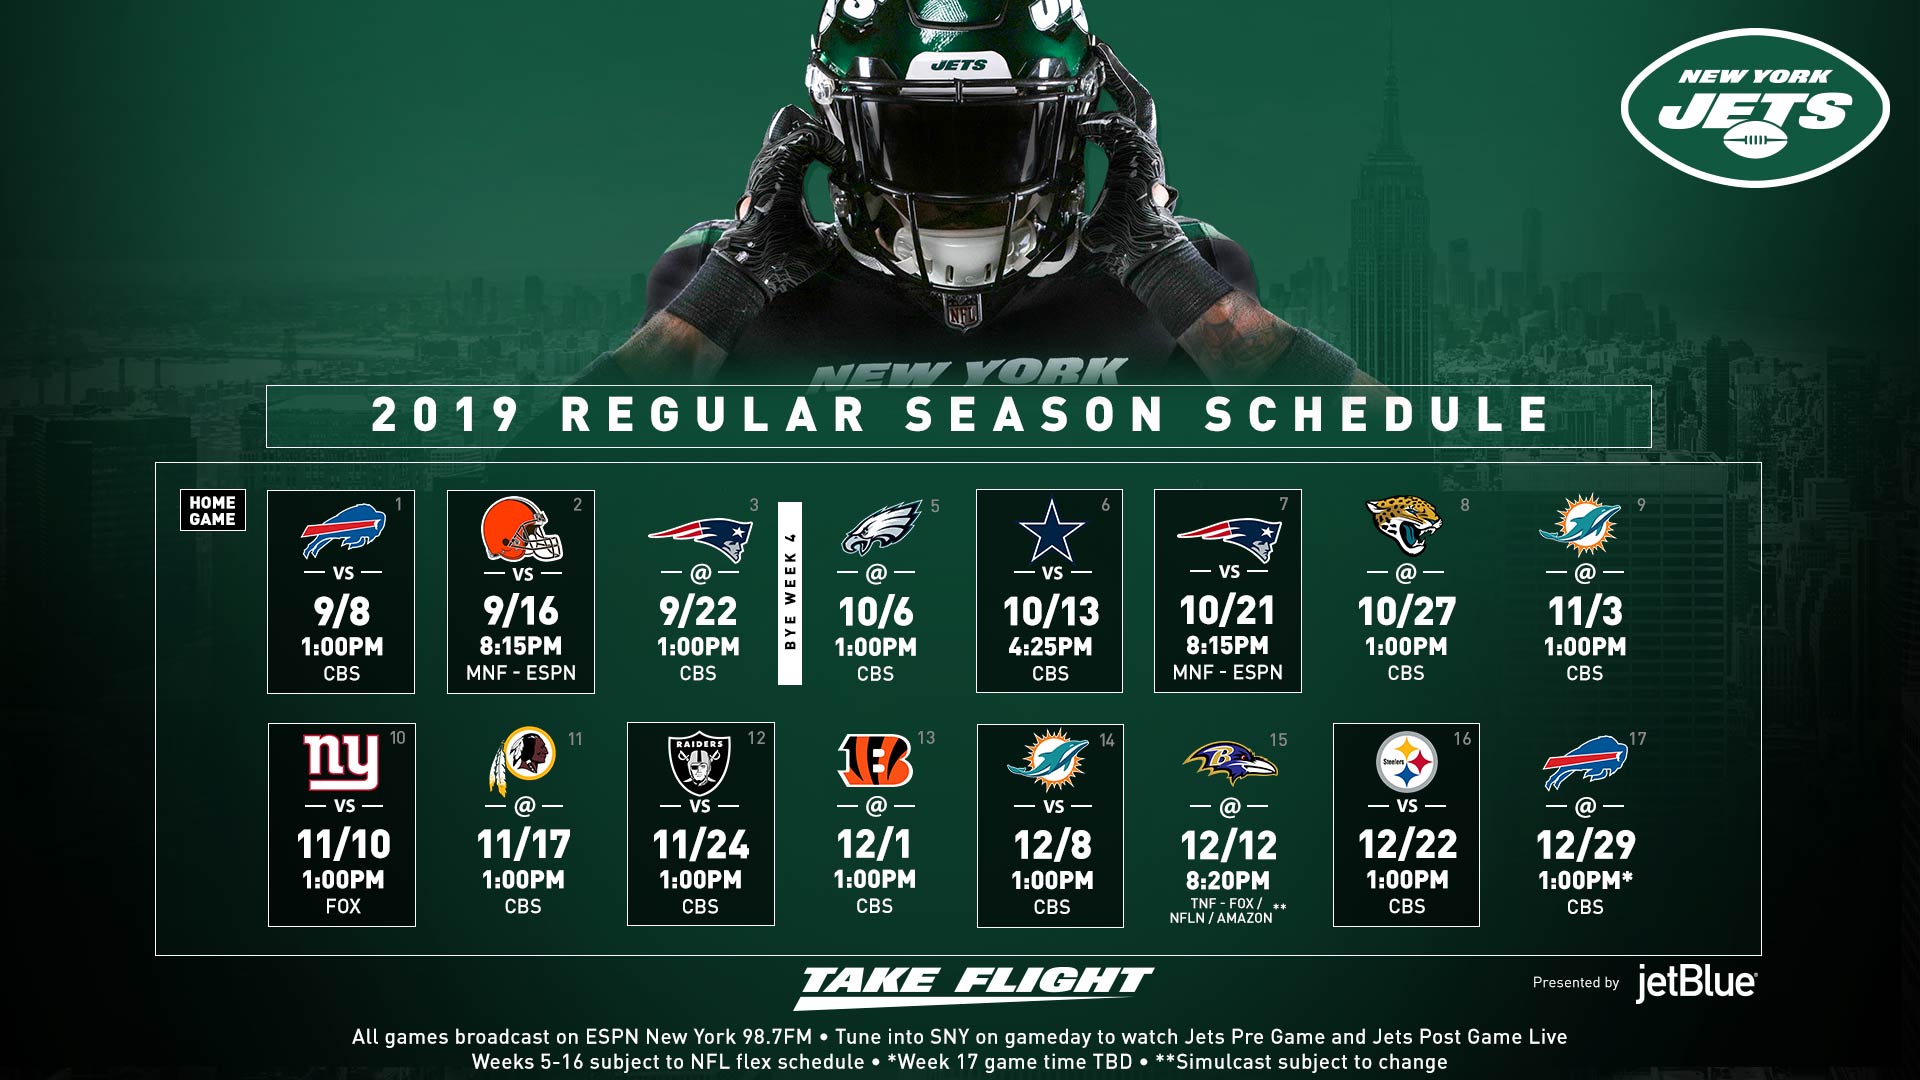 show me the new york jets football schedule